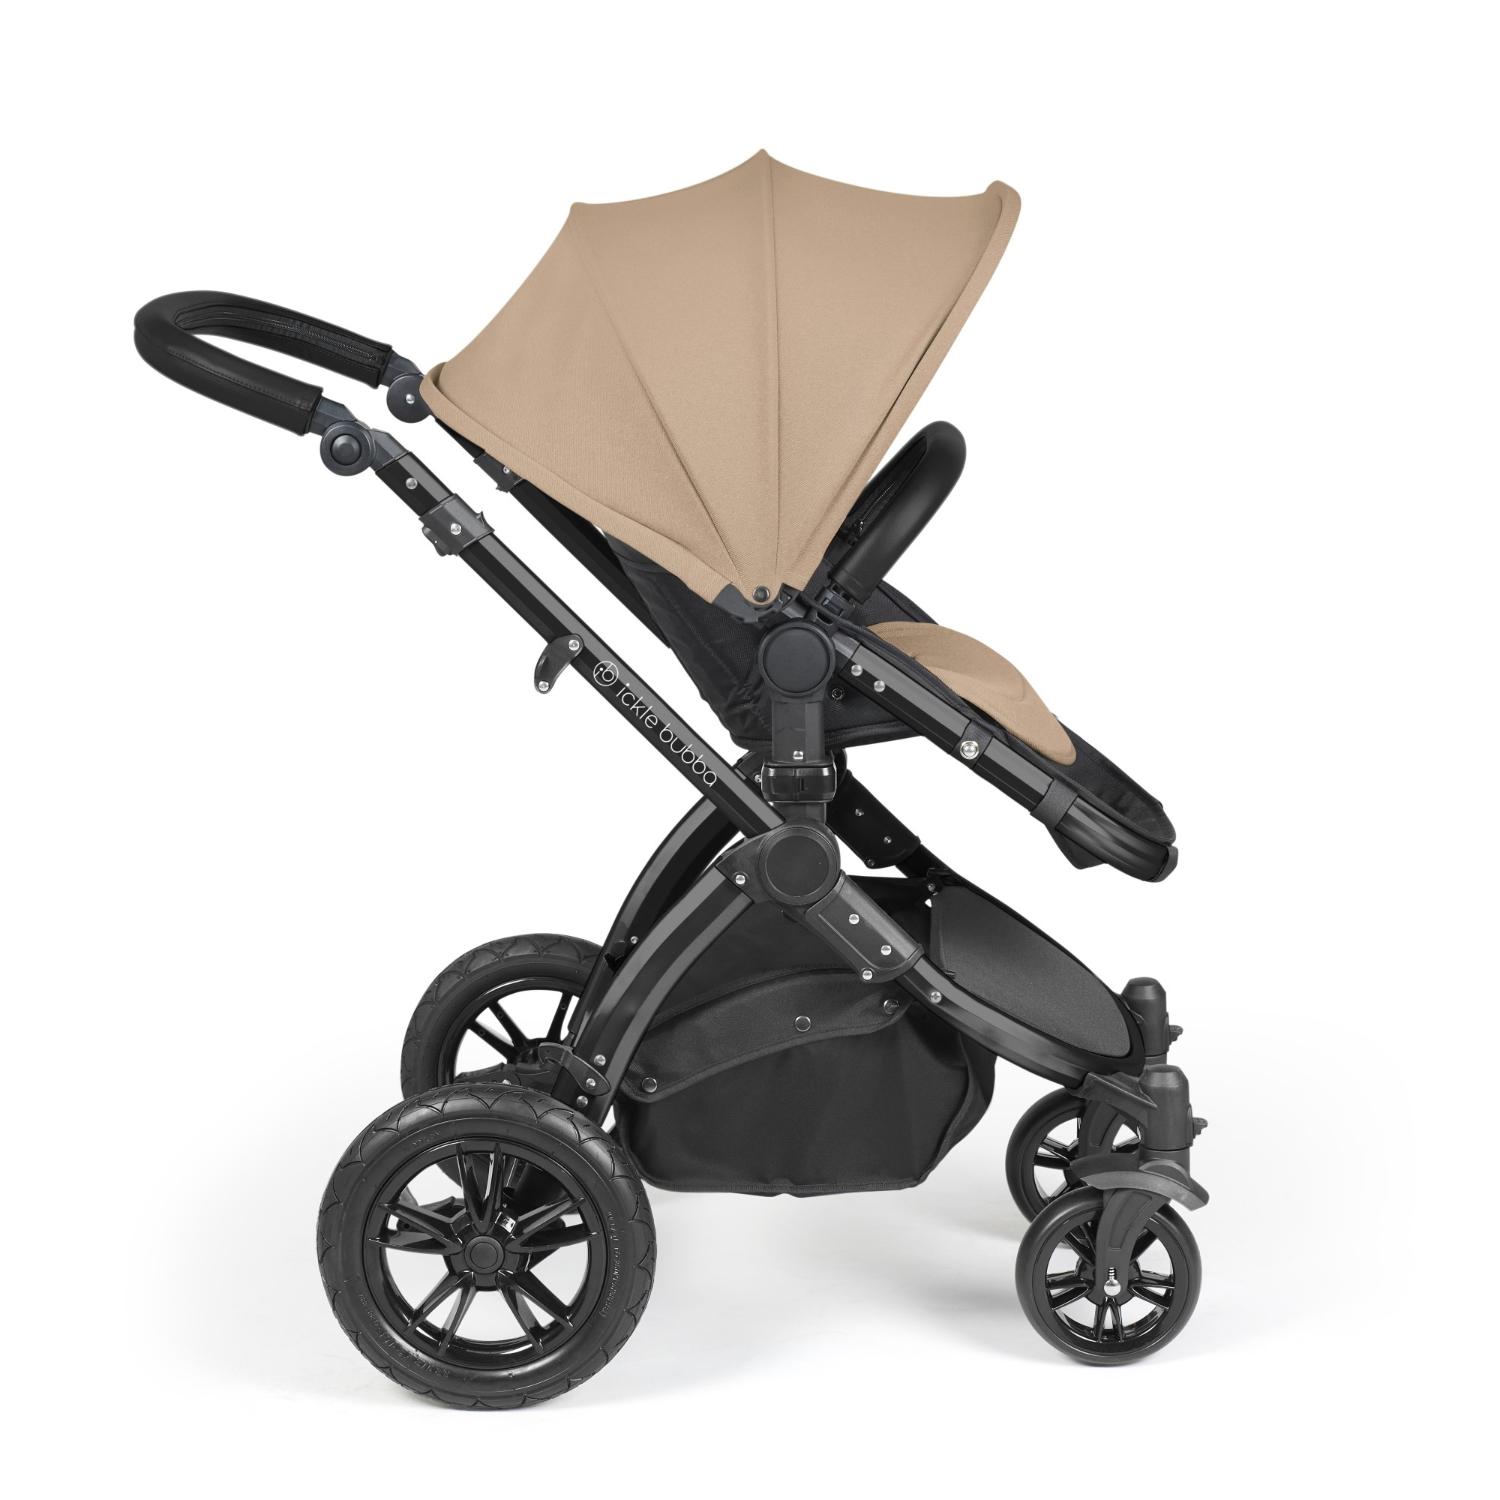 Side view of Ickle Bubba Stomp Luxe Pushchair with seat unit attached in Desert beige colour